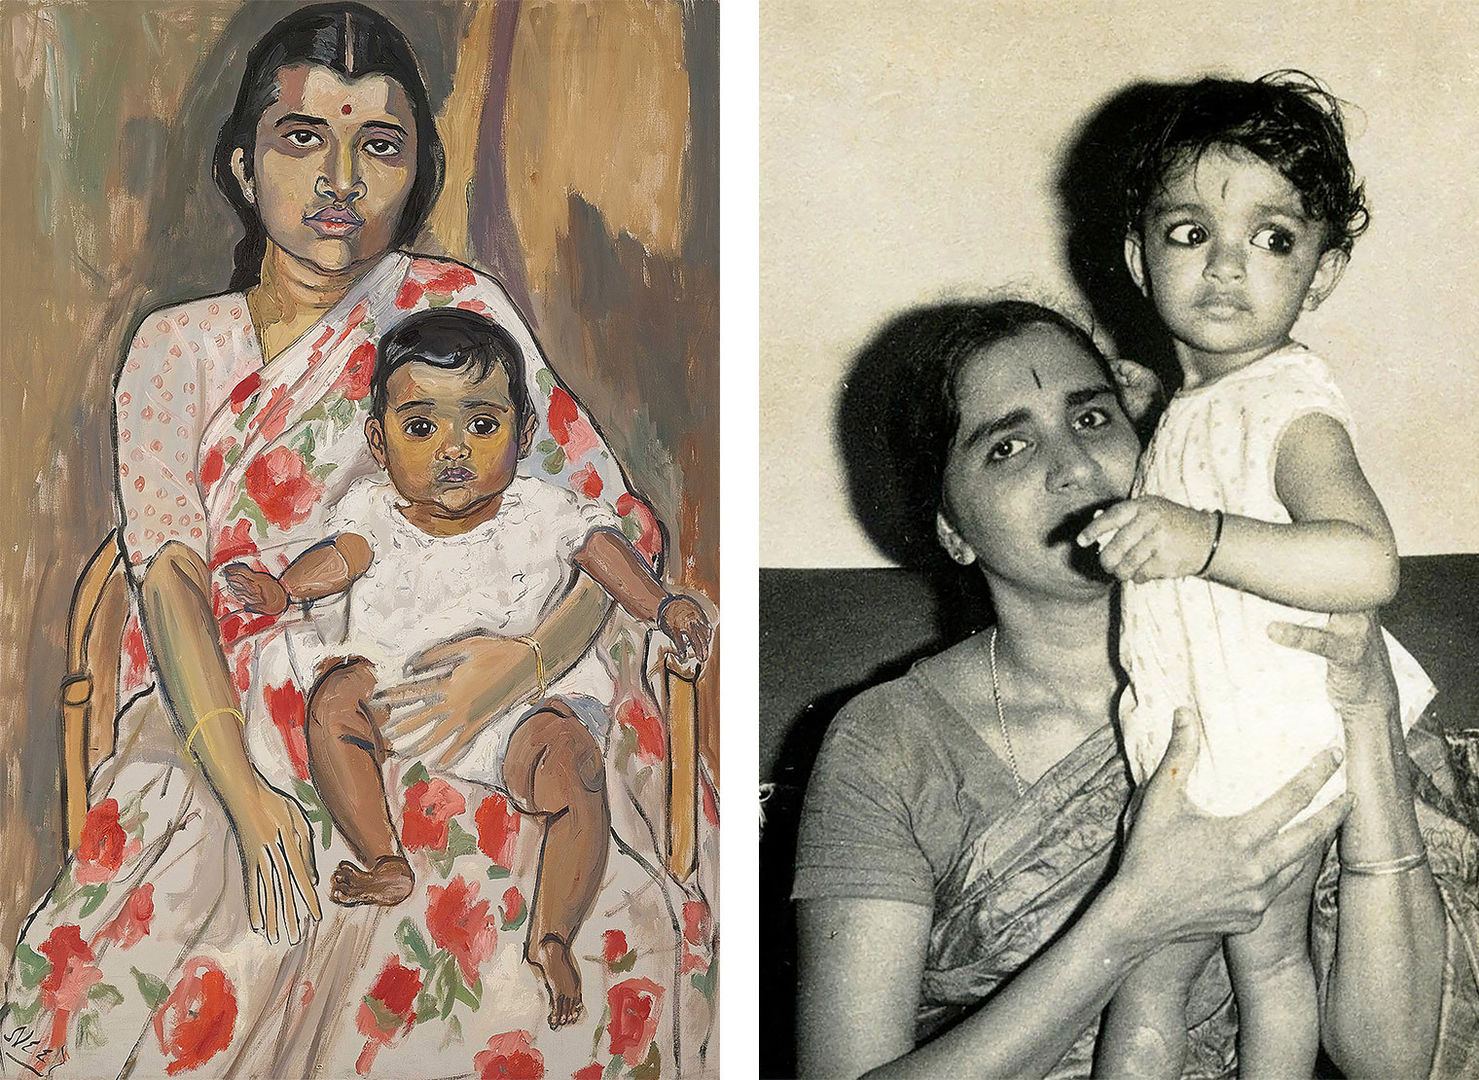 Left: A Painting of a woman in a red sari holding a child. Right: A black-and-white photograph of a woman in a sari holding a child